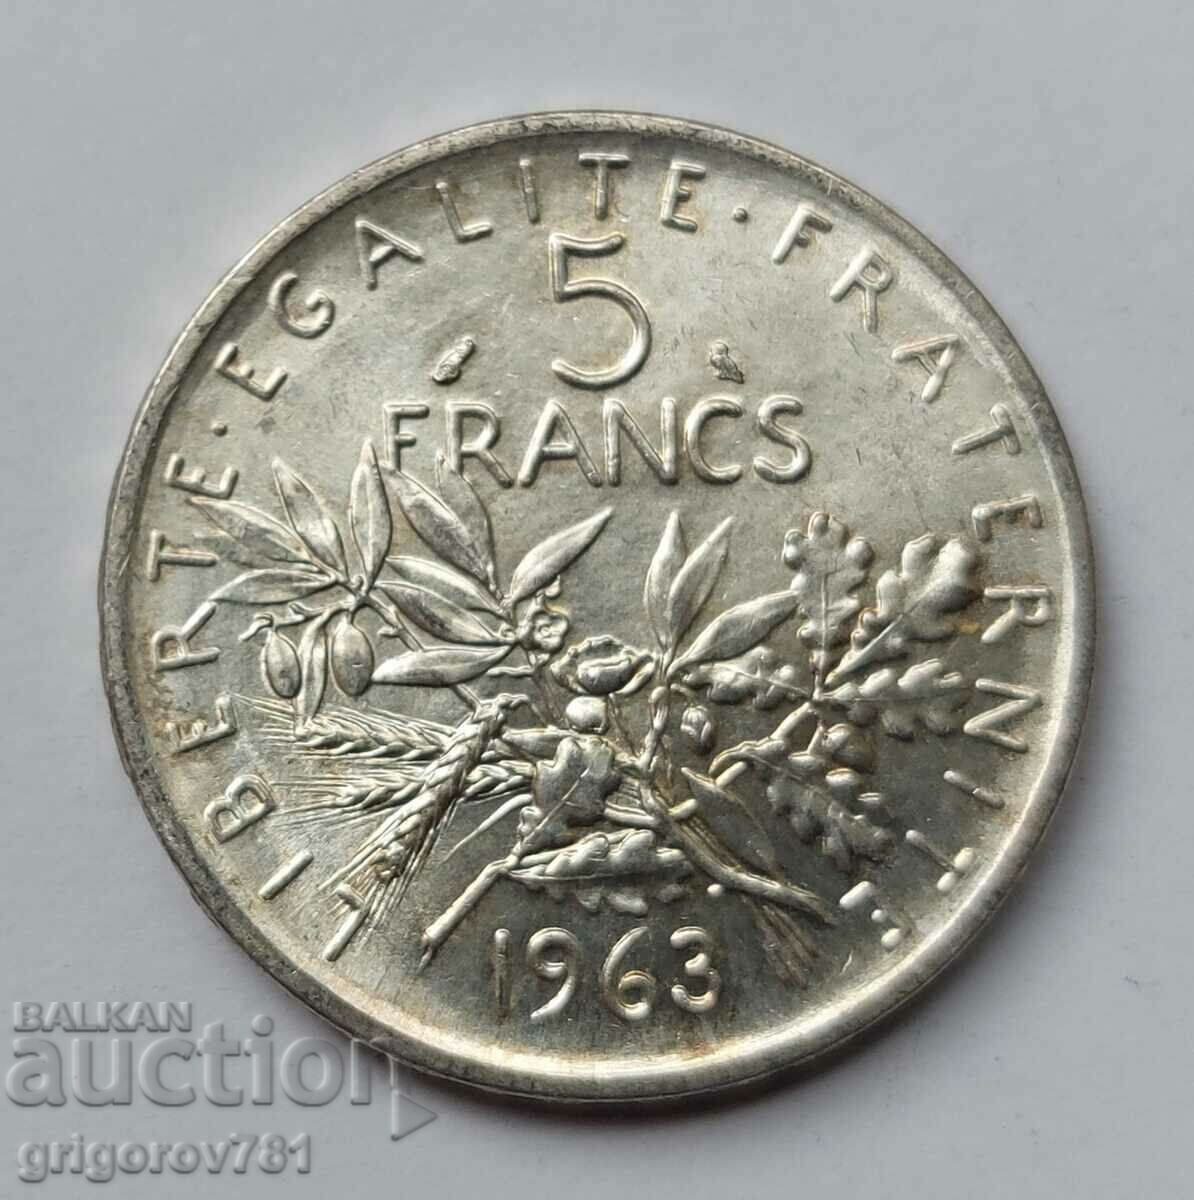 5 Francs Silver France 1963 - Silver Coin #5